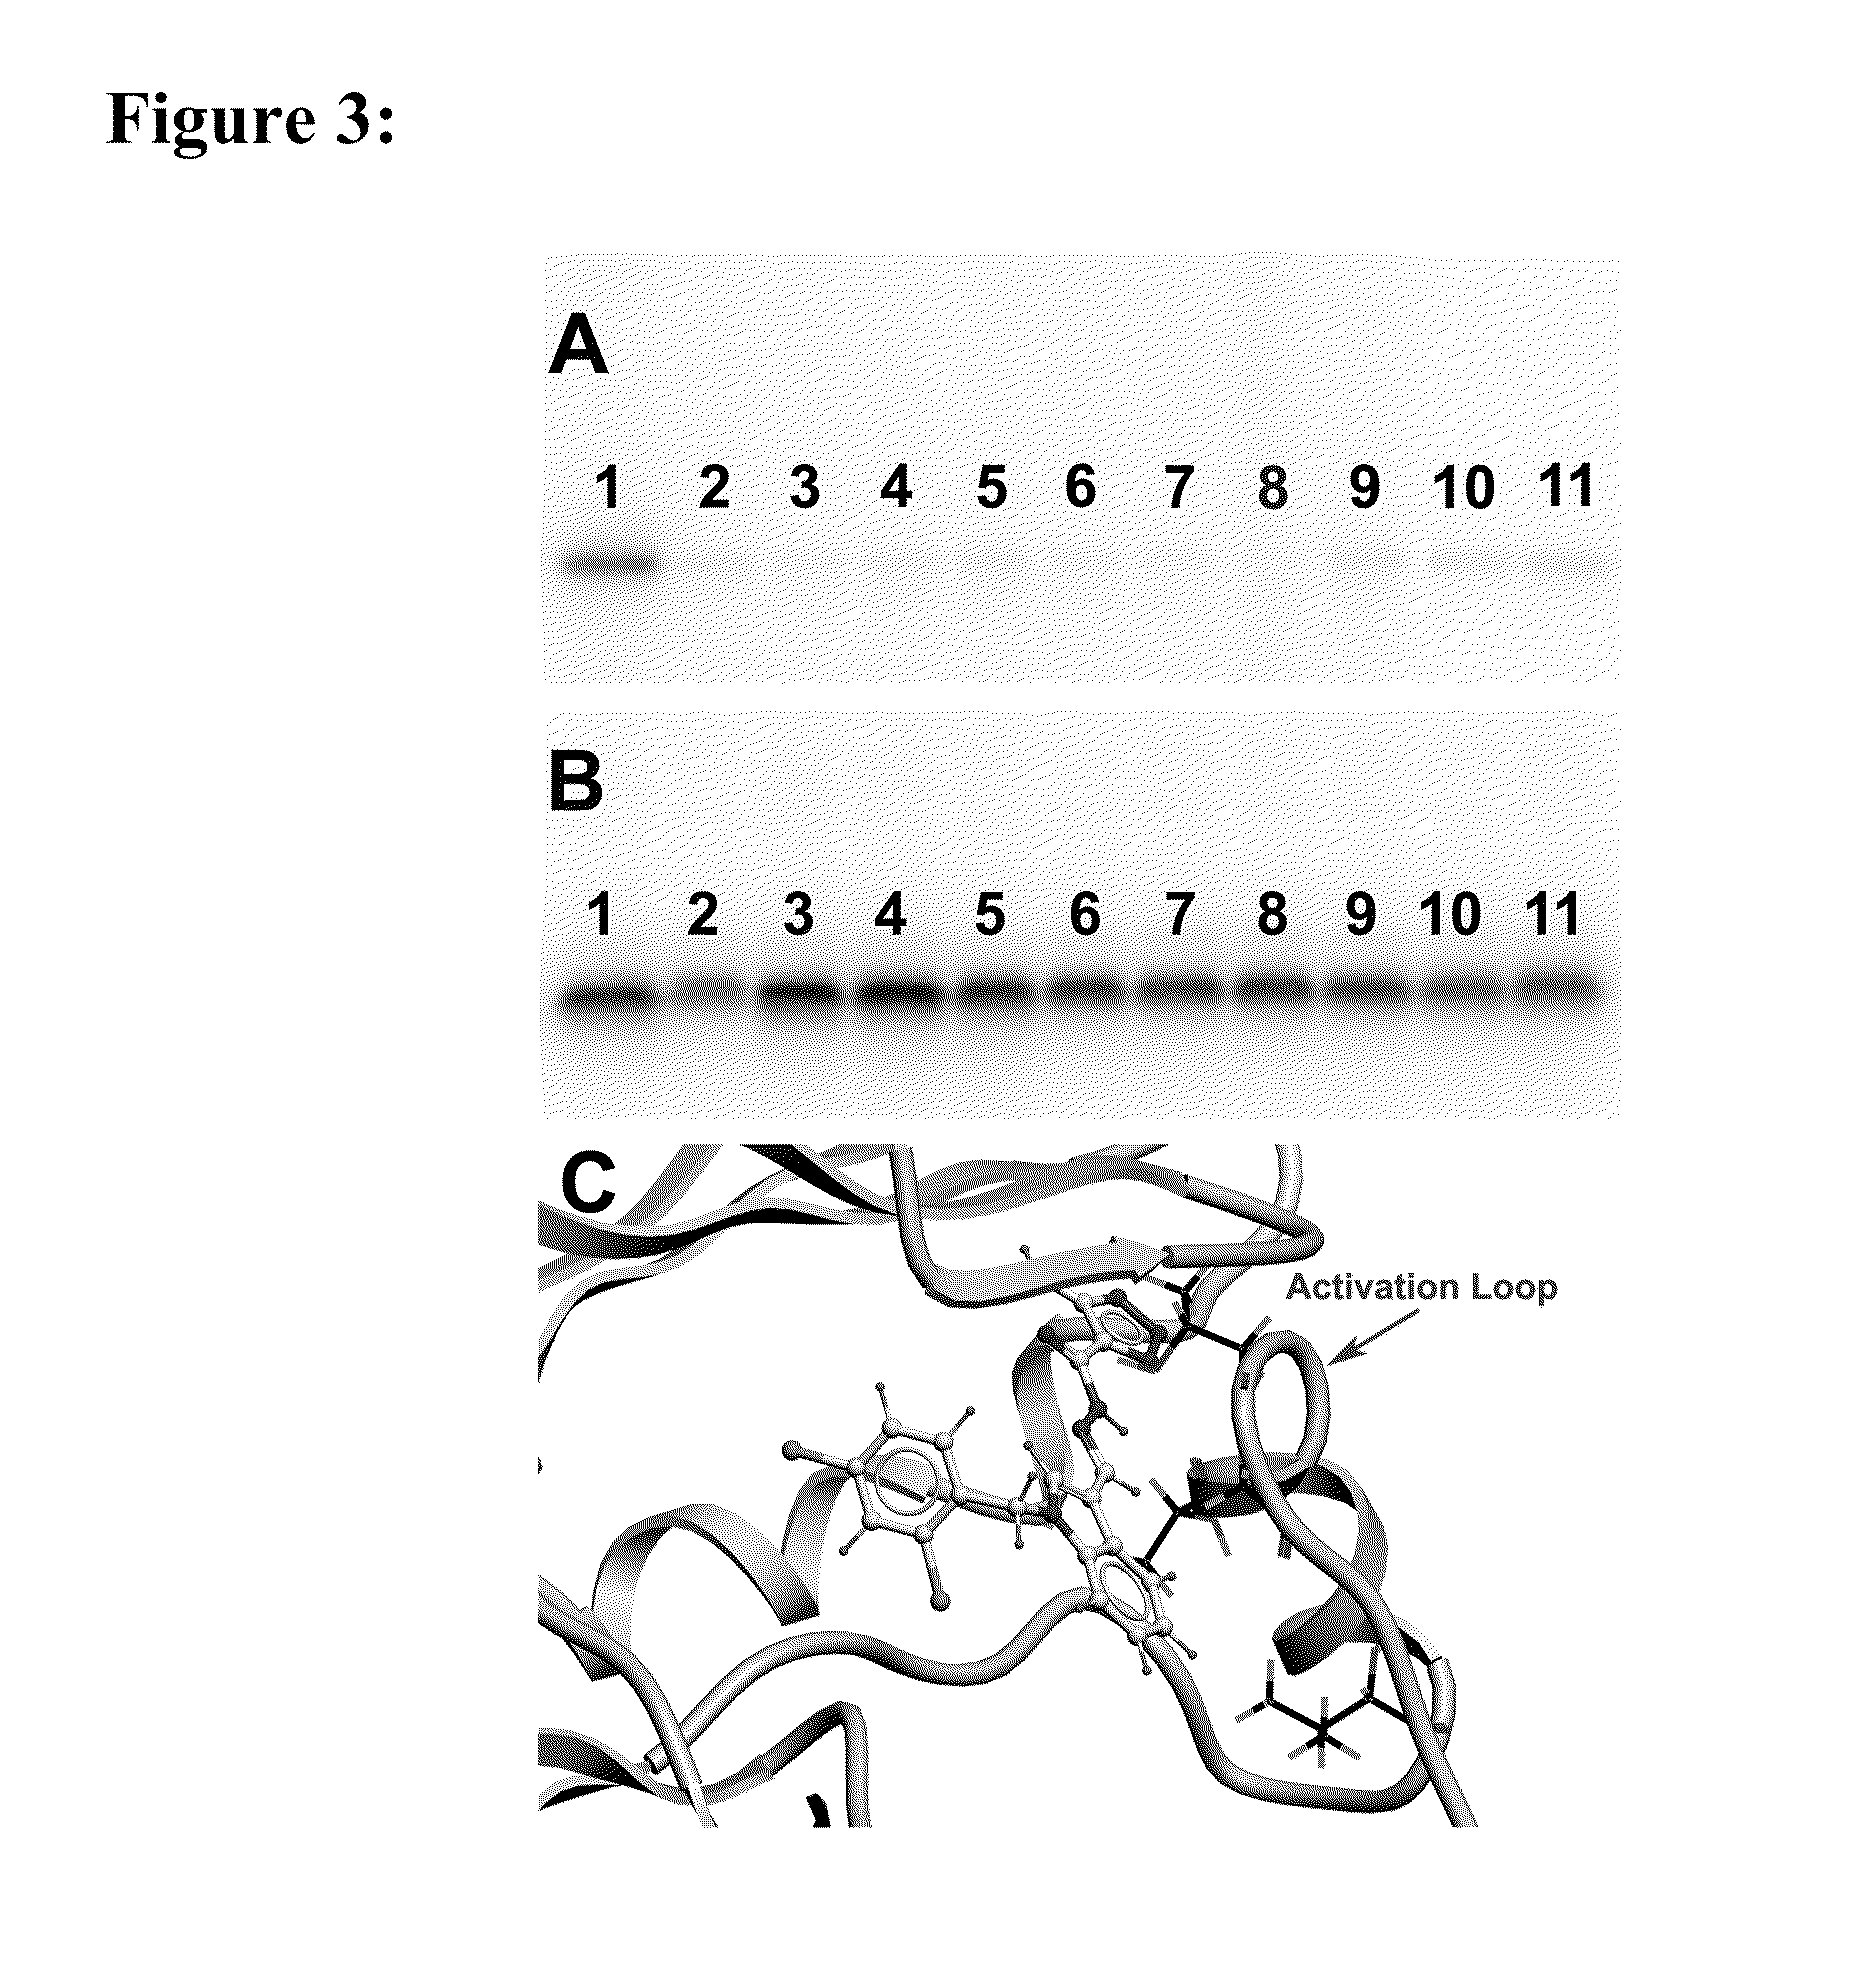 Method of treating cancer by inhibition of protein kinase-like endoplasmic reticulum protein kinase